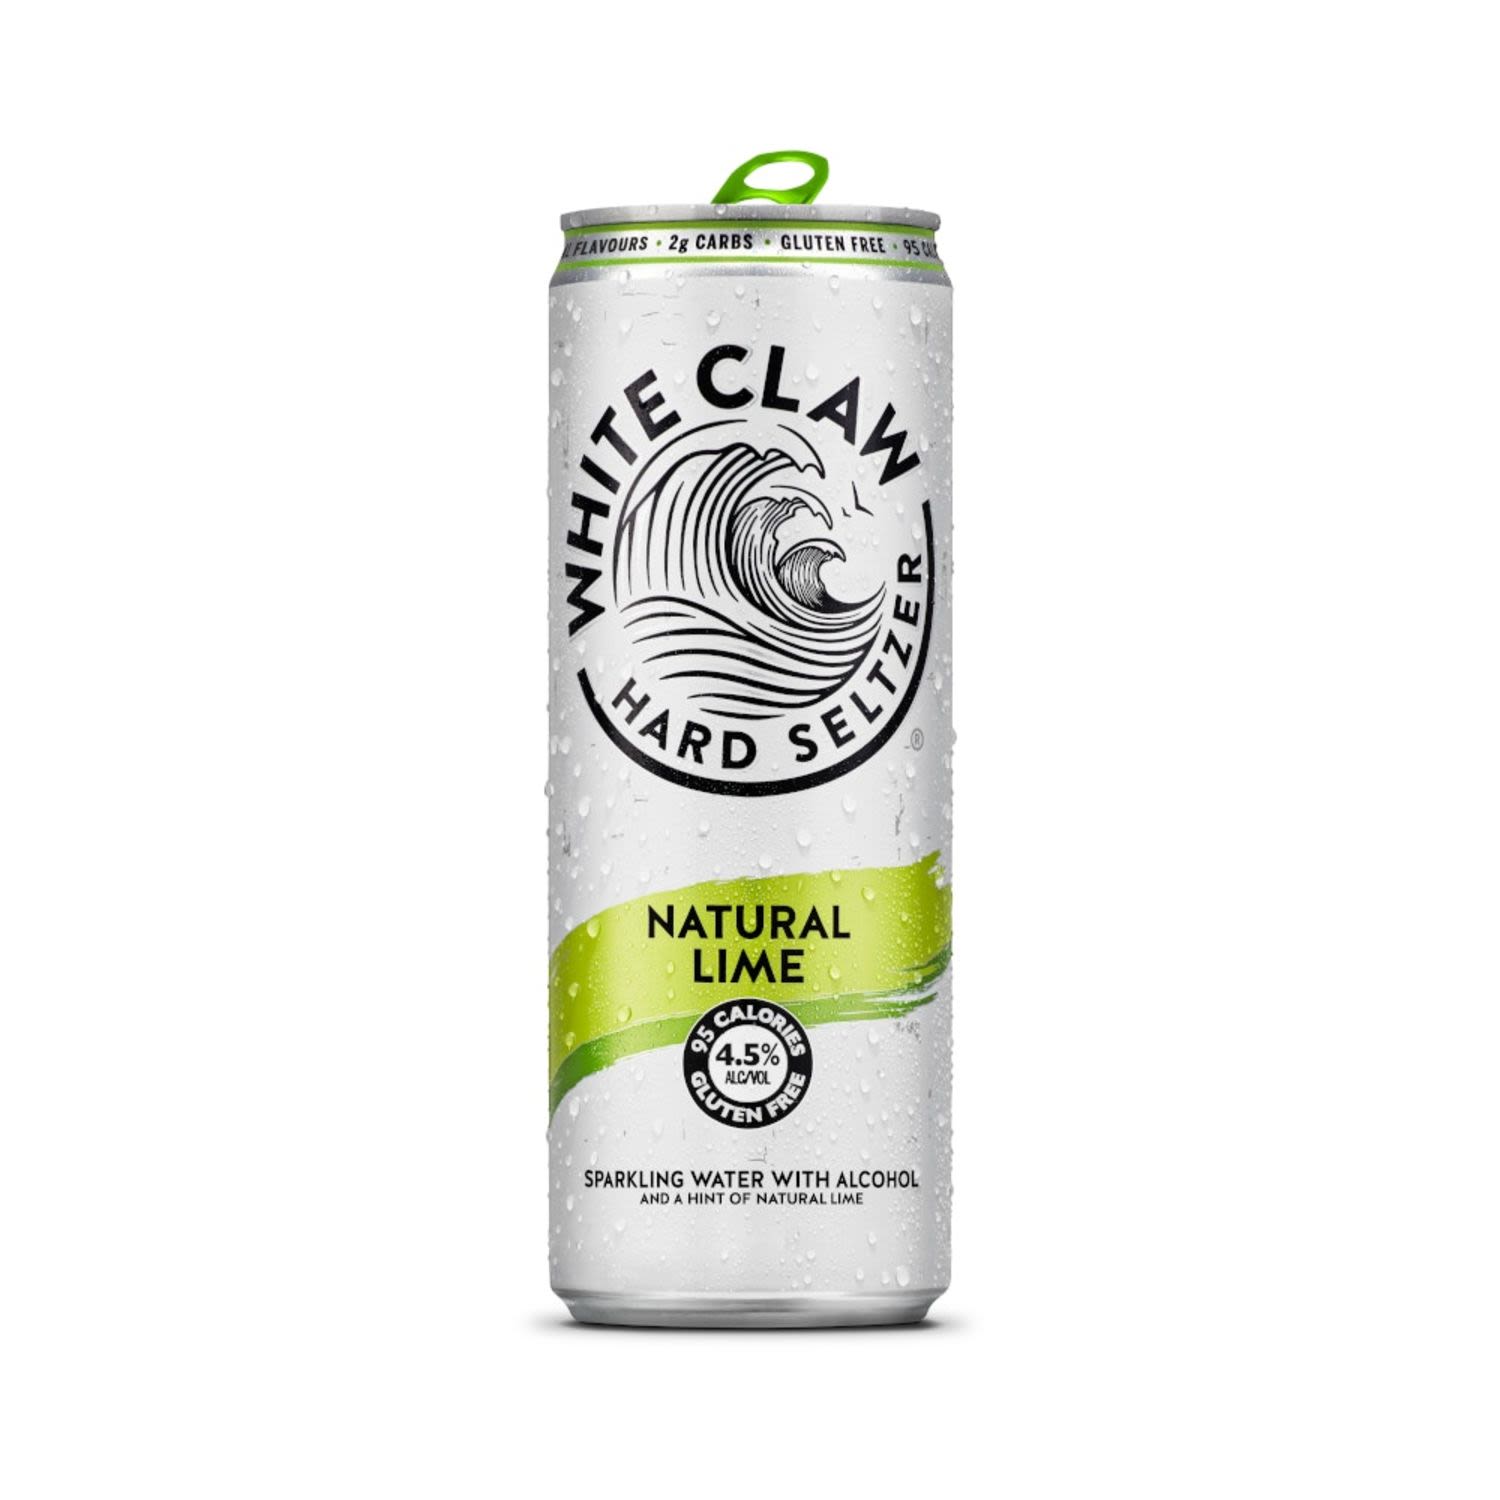 The fresh flavor of Natural Lime can’t be ignored. Every sip is met with a purely refreshing, zesty citrus aroma and a clean, crisp finish.<br /> <br />Alcohol Volume: 4.50%<br /><br />Pack Format: 24 Pack<br /><br />Standard Drinks: 1.2</br /><br />Pack Type: Can<br />